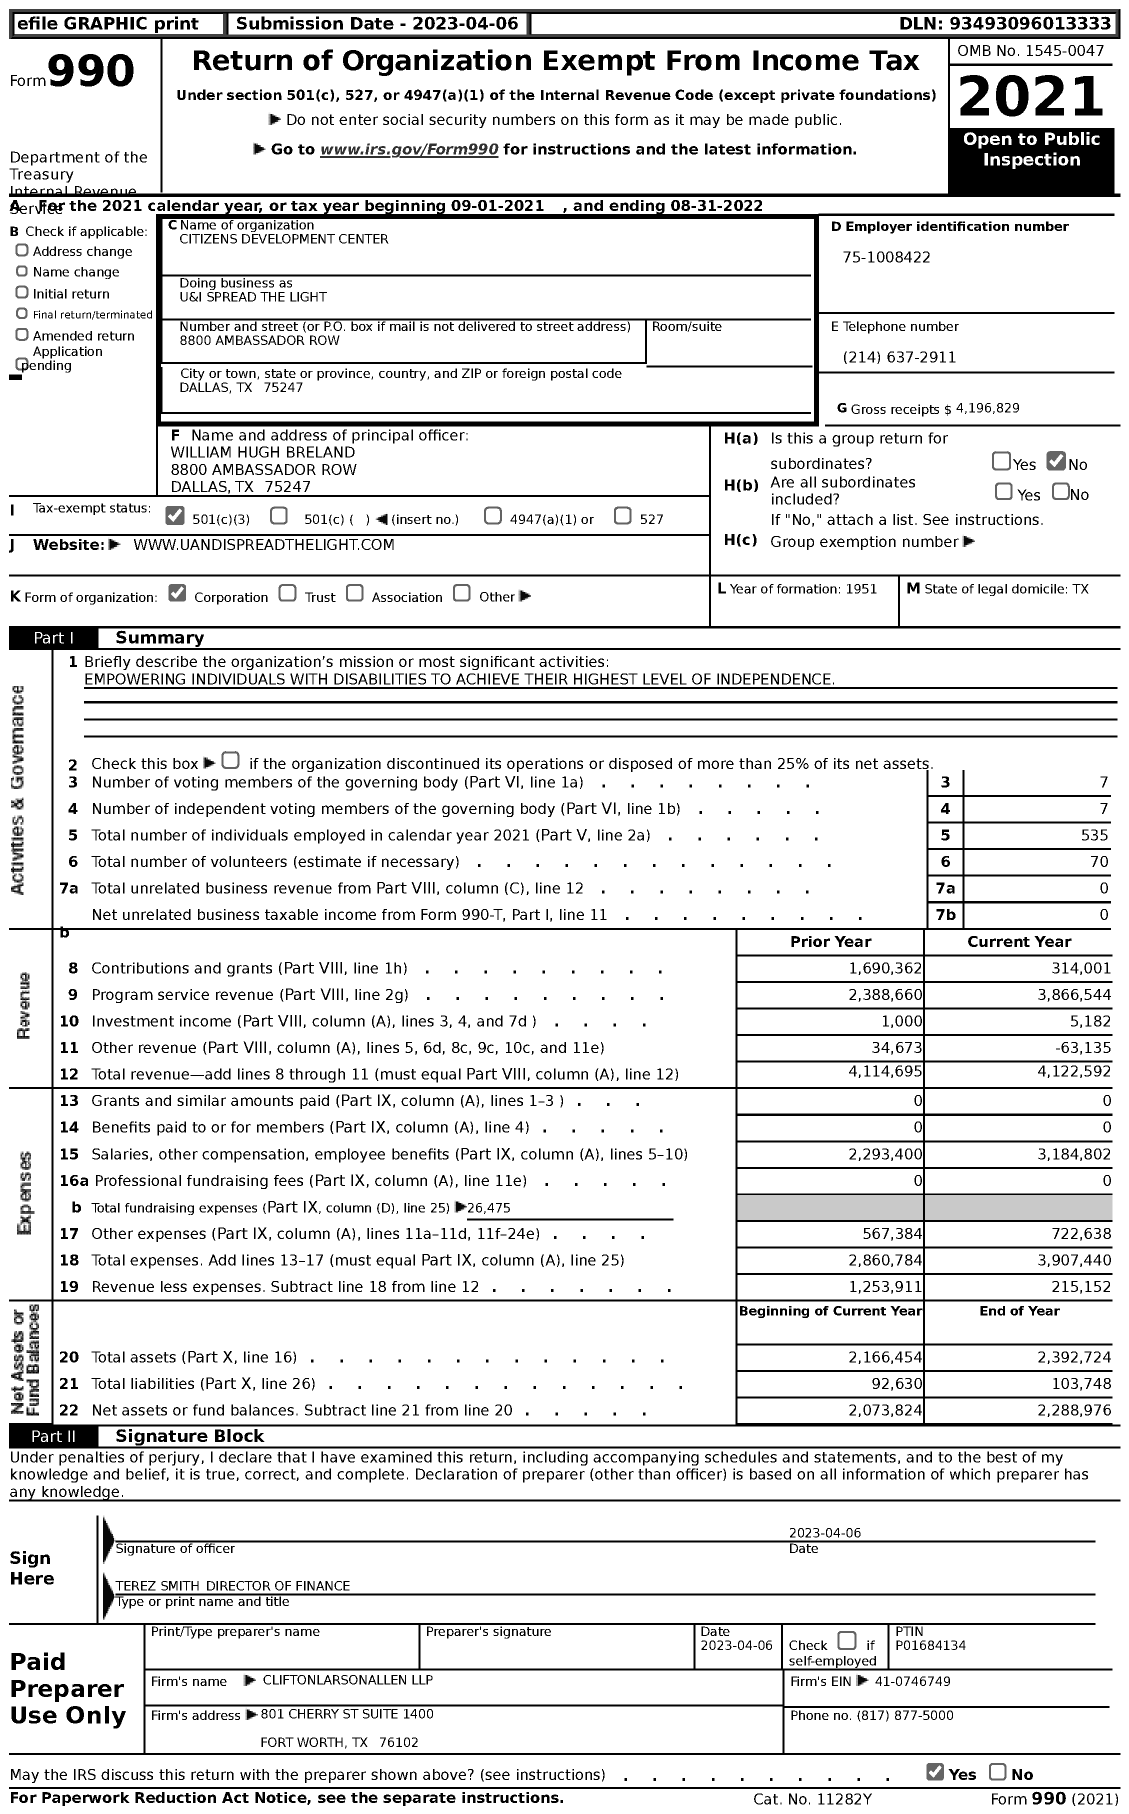 Image of first page of 2021 Form 990 for U&i Spread the Light